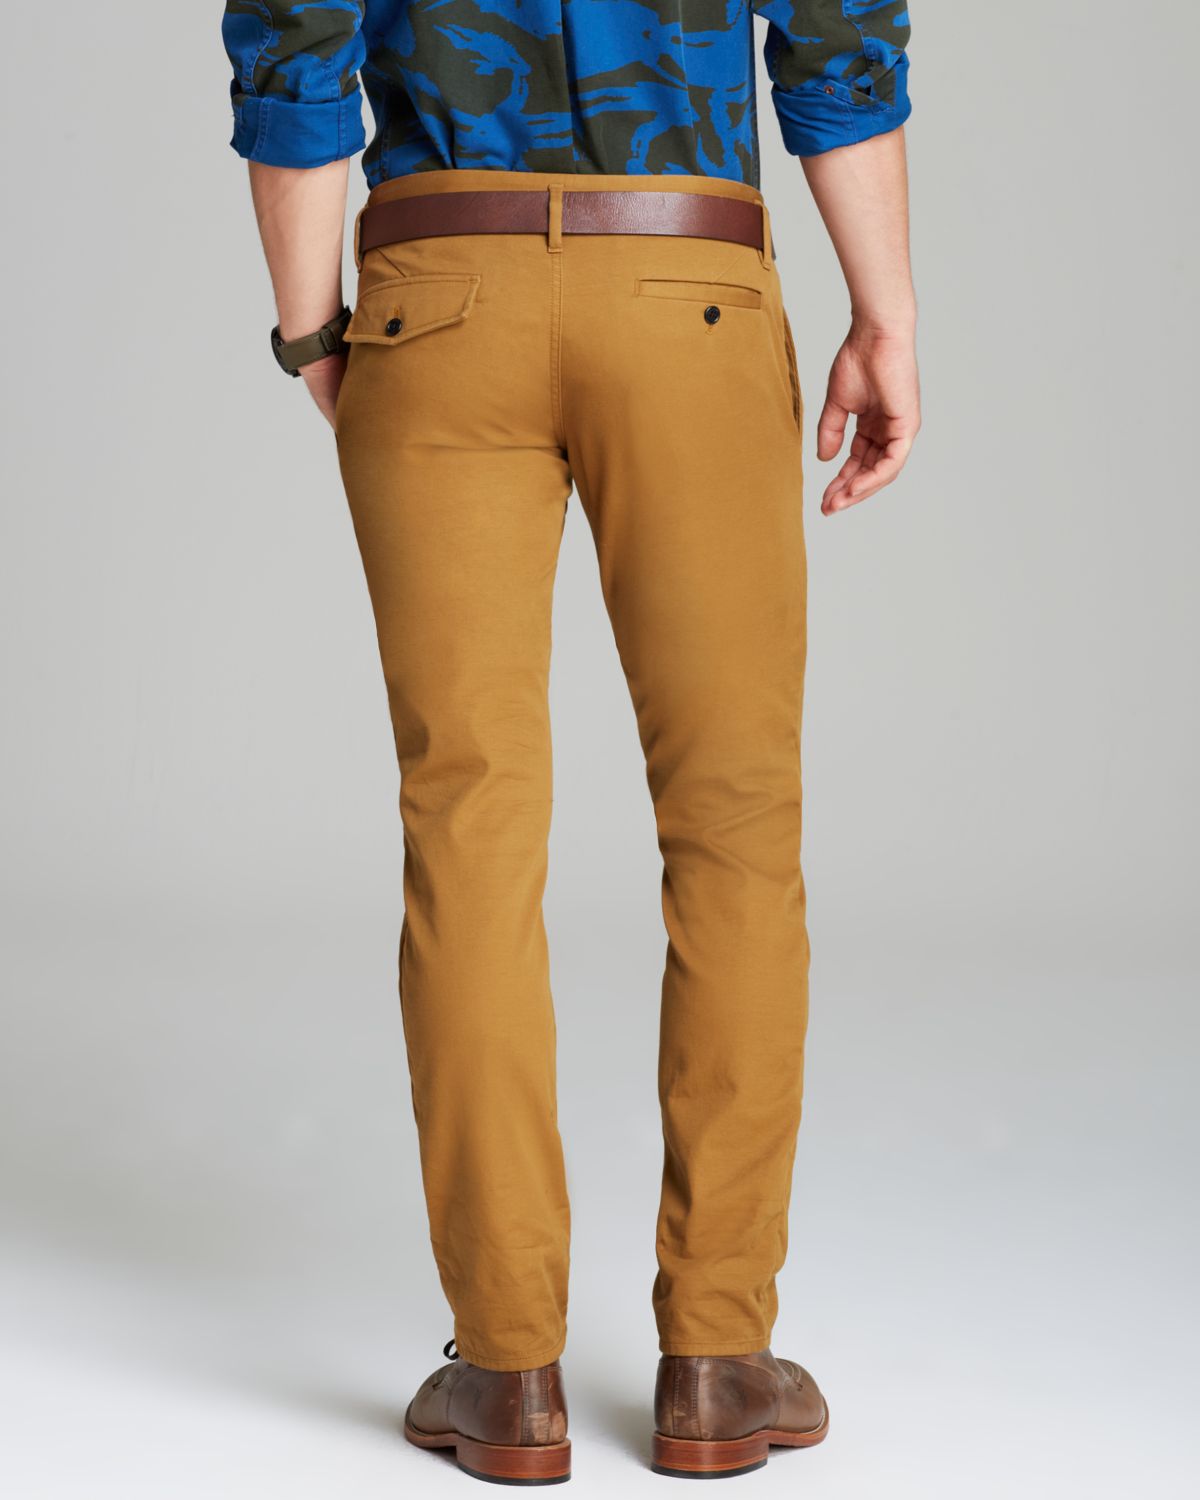 Marc by marc jacobs Camden Cotton Cuffed Pants in Brown for Men | Lyst